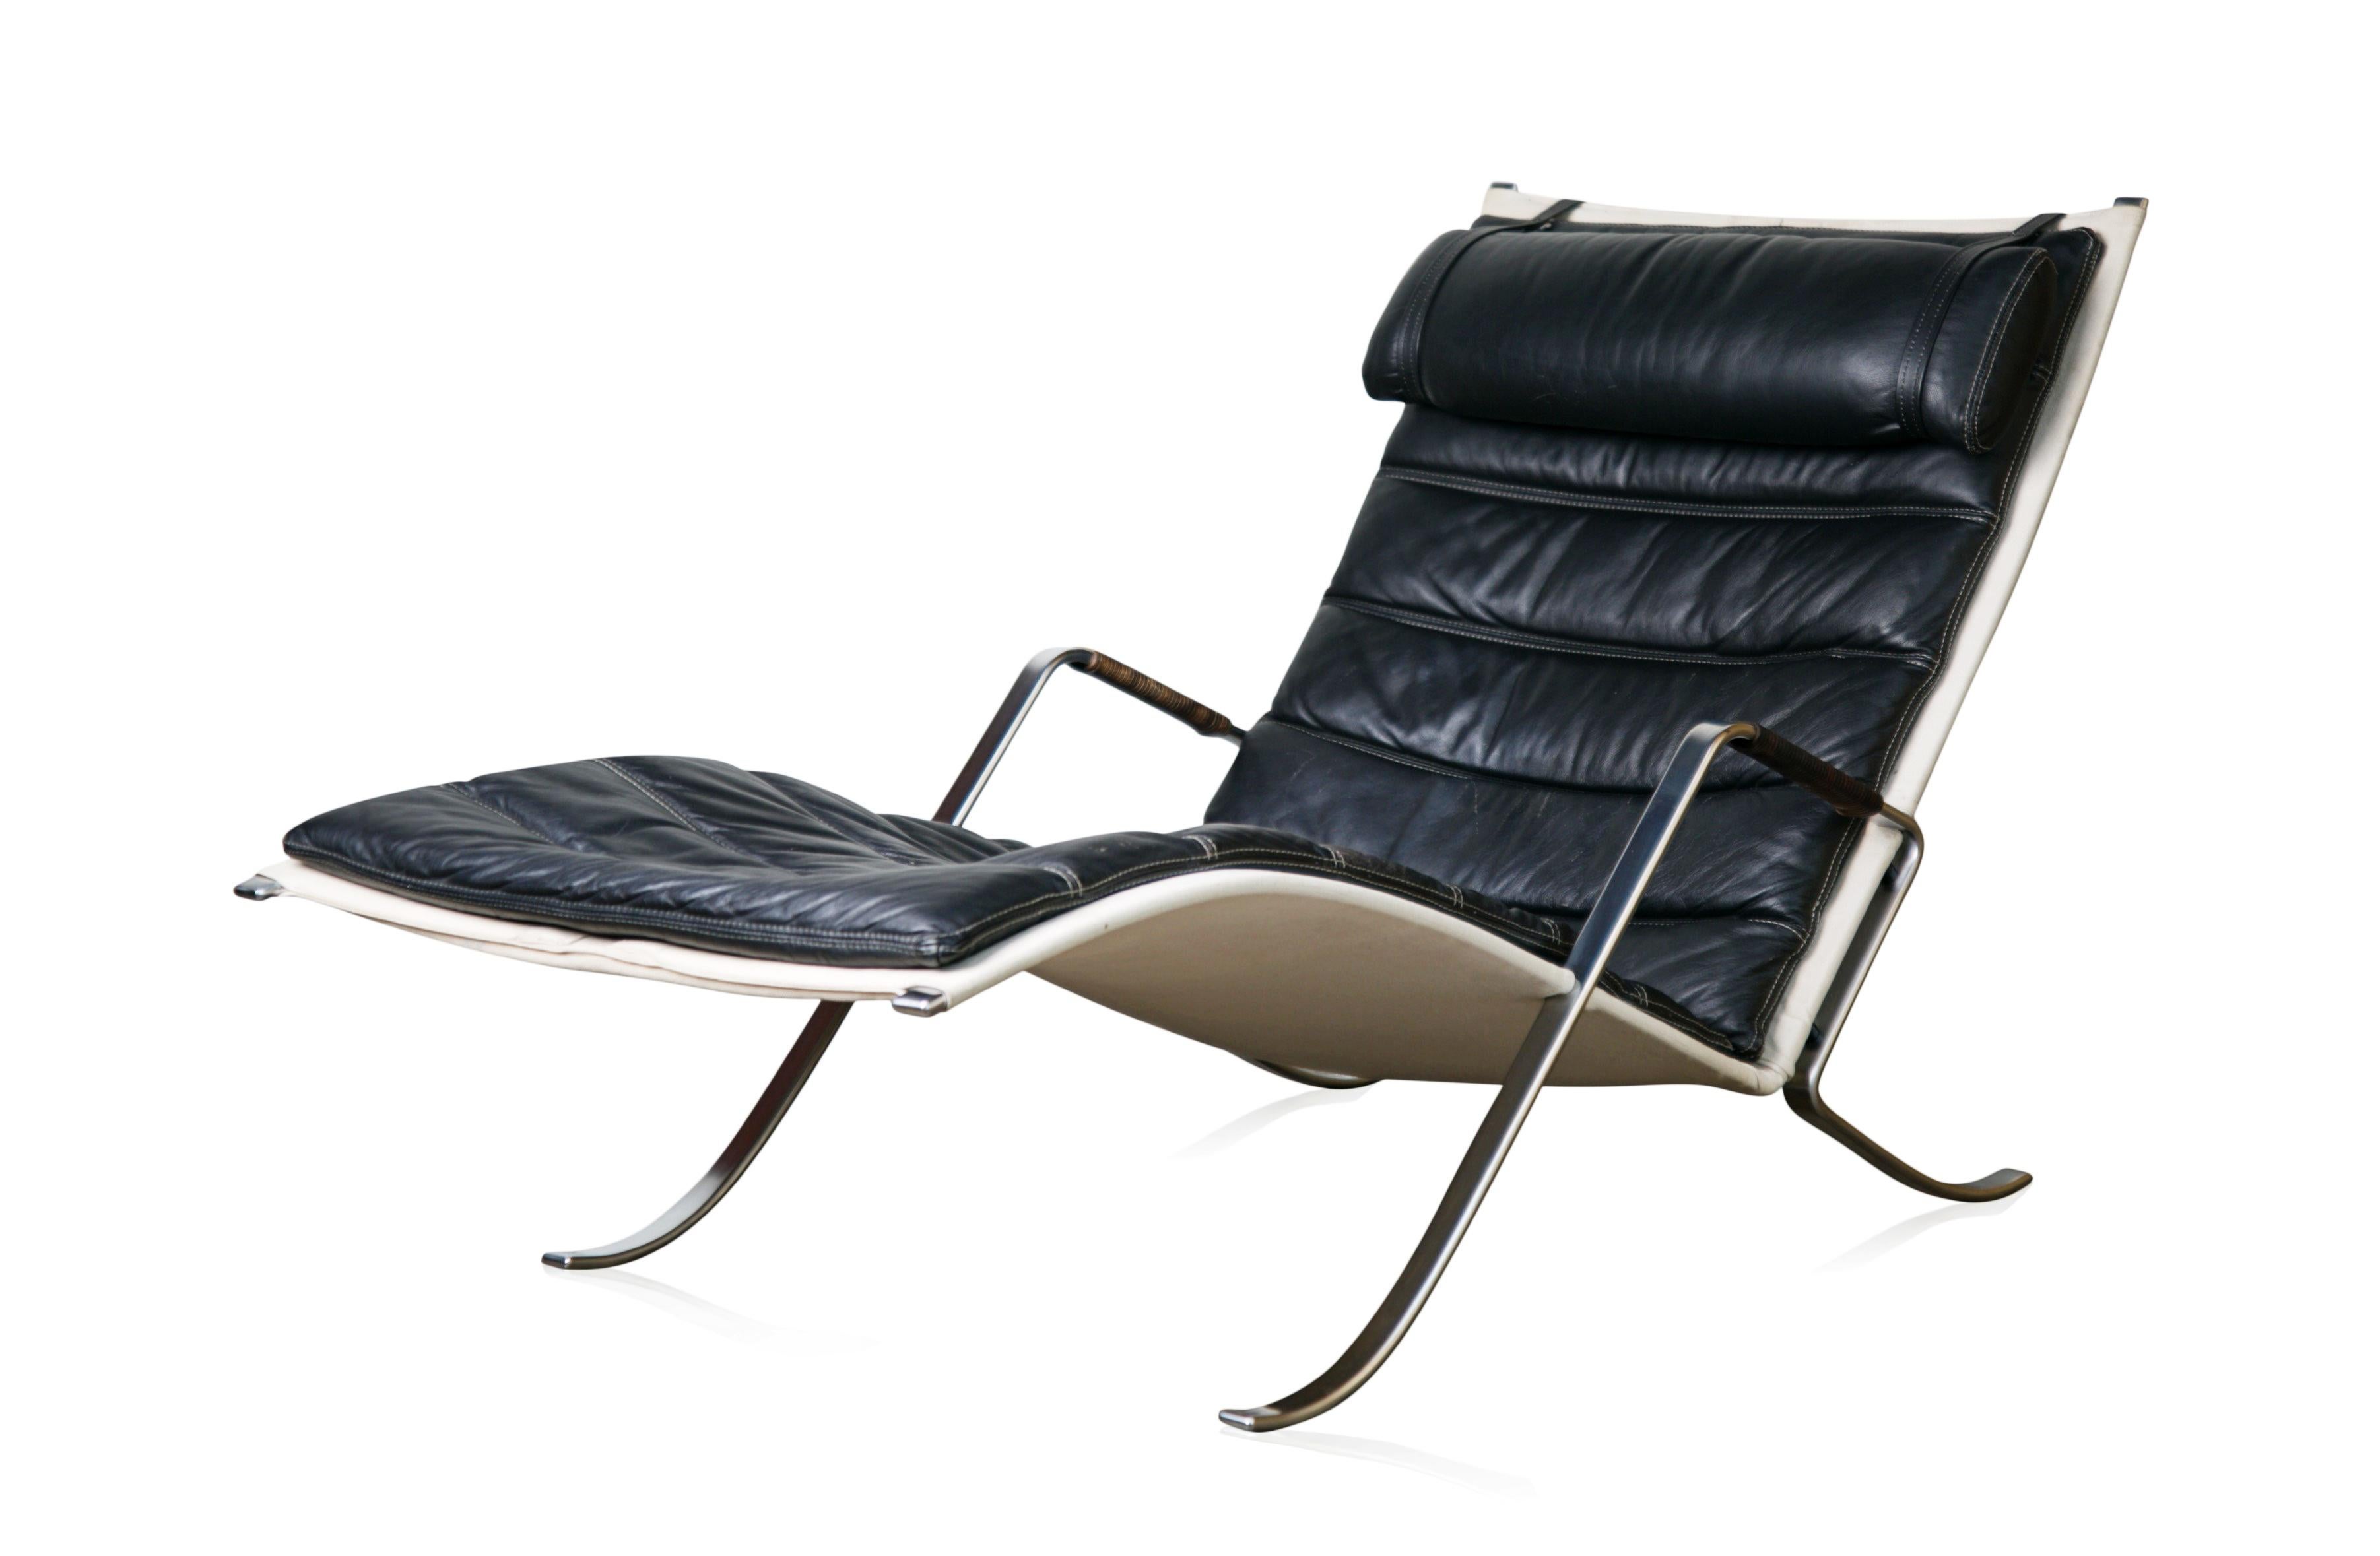 We're well known for our inventory being highly sought after and collected items - and this is one of our absolute all-time favorites. The sleek styling of this FK-87 Grasshopper chaise lounge by Preben Fabricius & Jorgen Kastholm for Alfred Kill